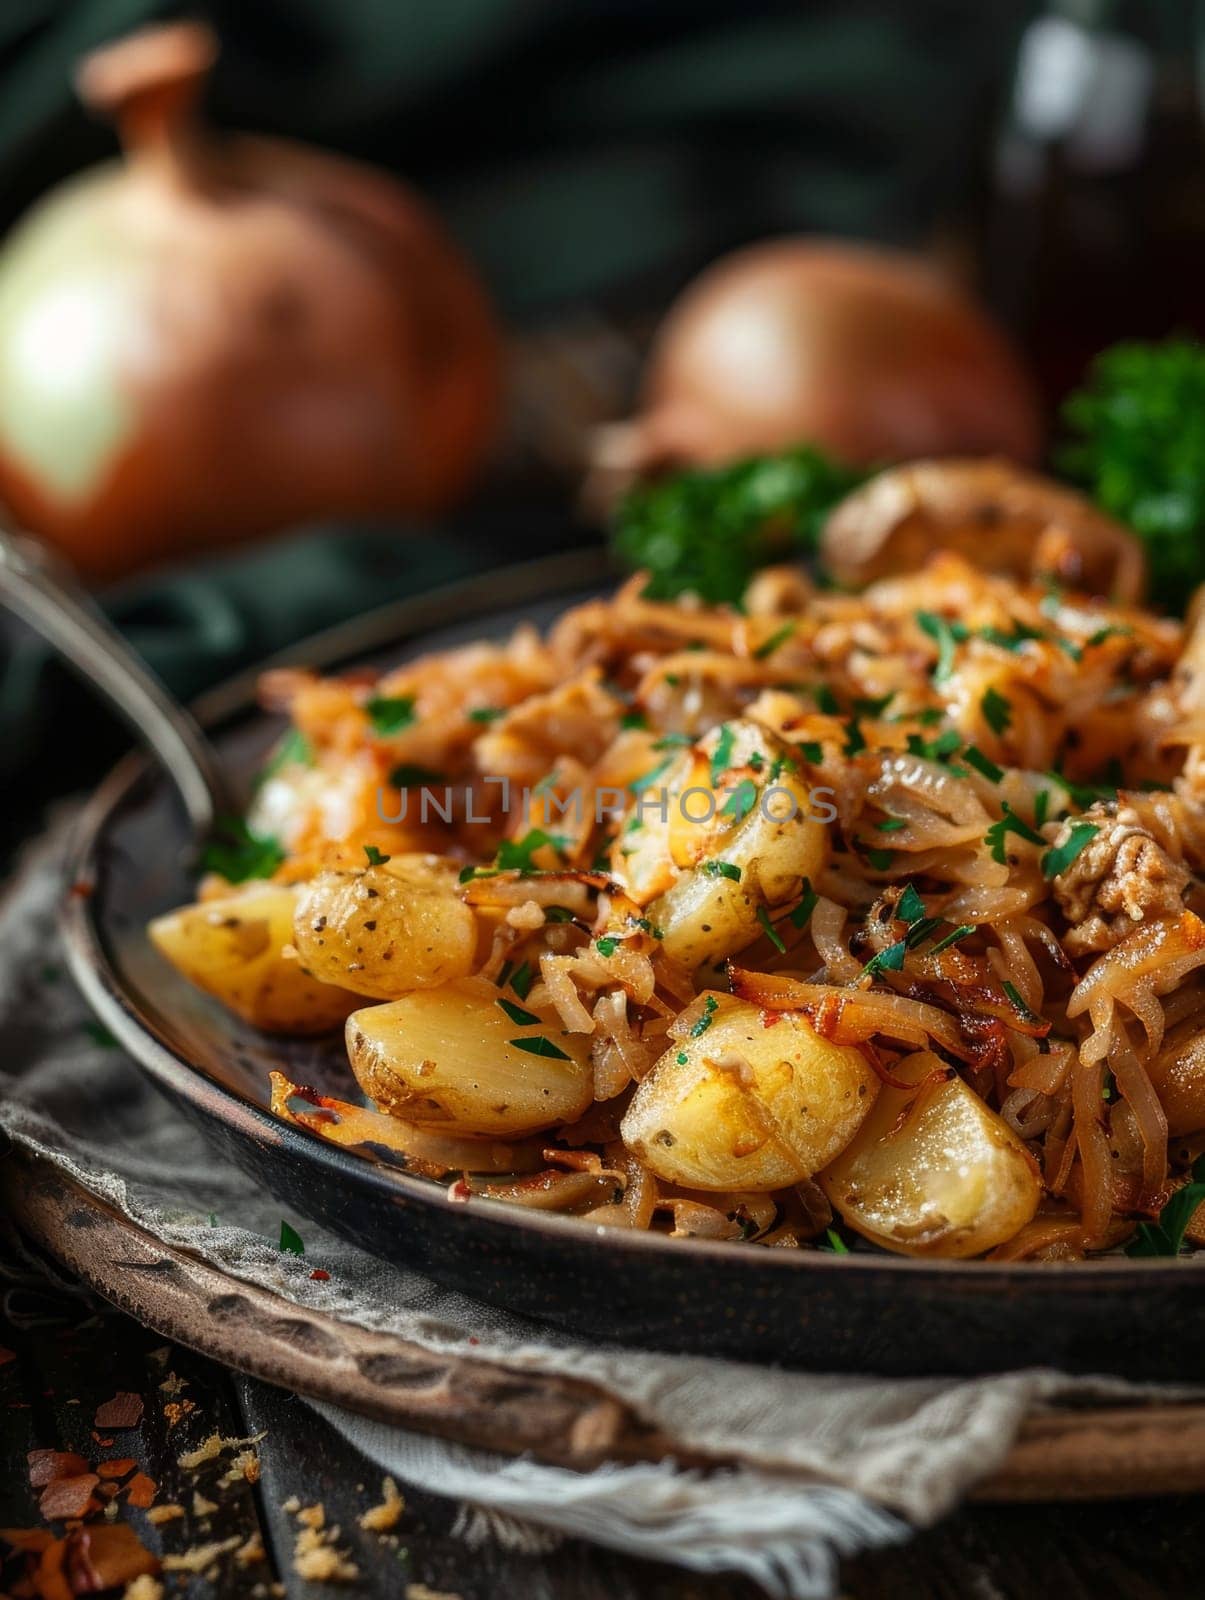 Portuguese bacalhau a bras on a plate, made with shredded salt cod, onions, and fried potatoes. A flavorful and traditional dish from Portugal. by sfinks